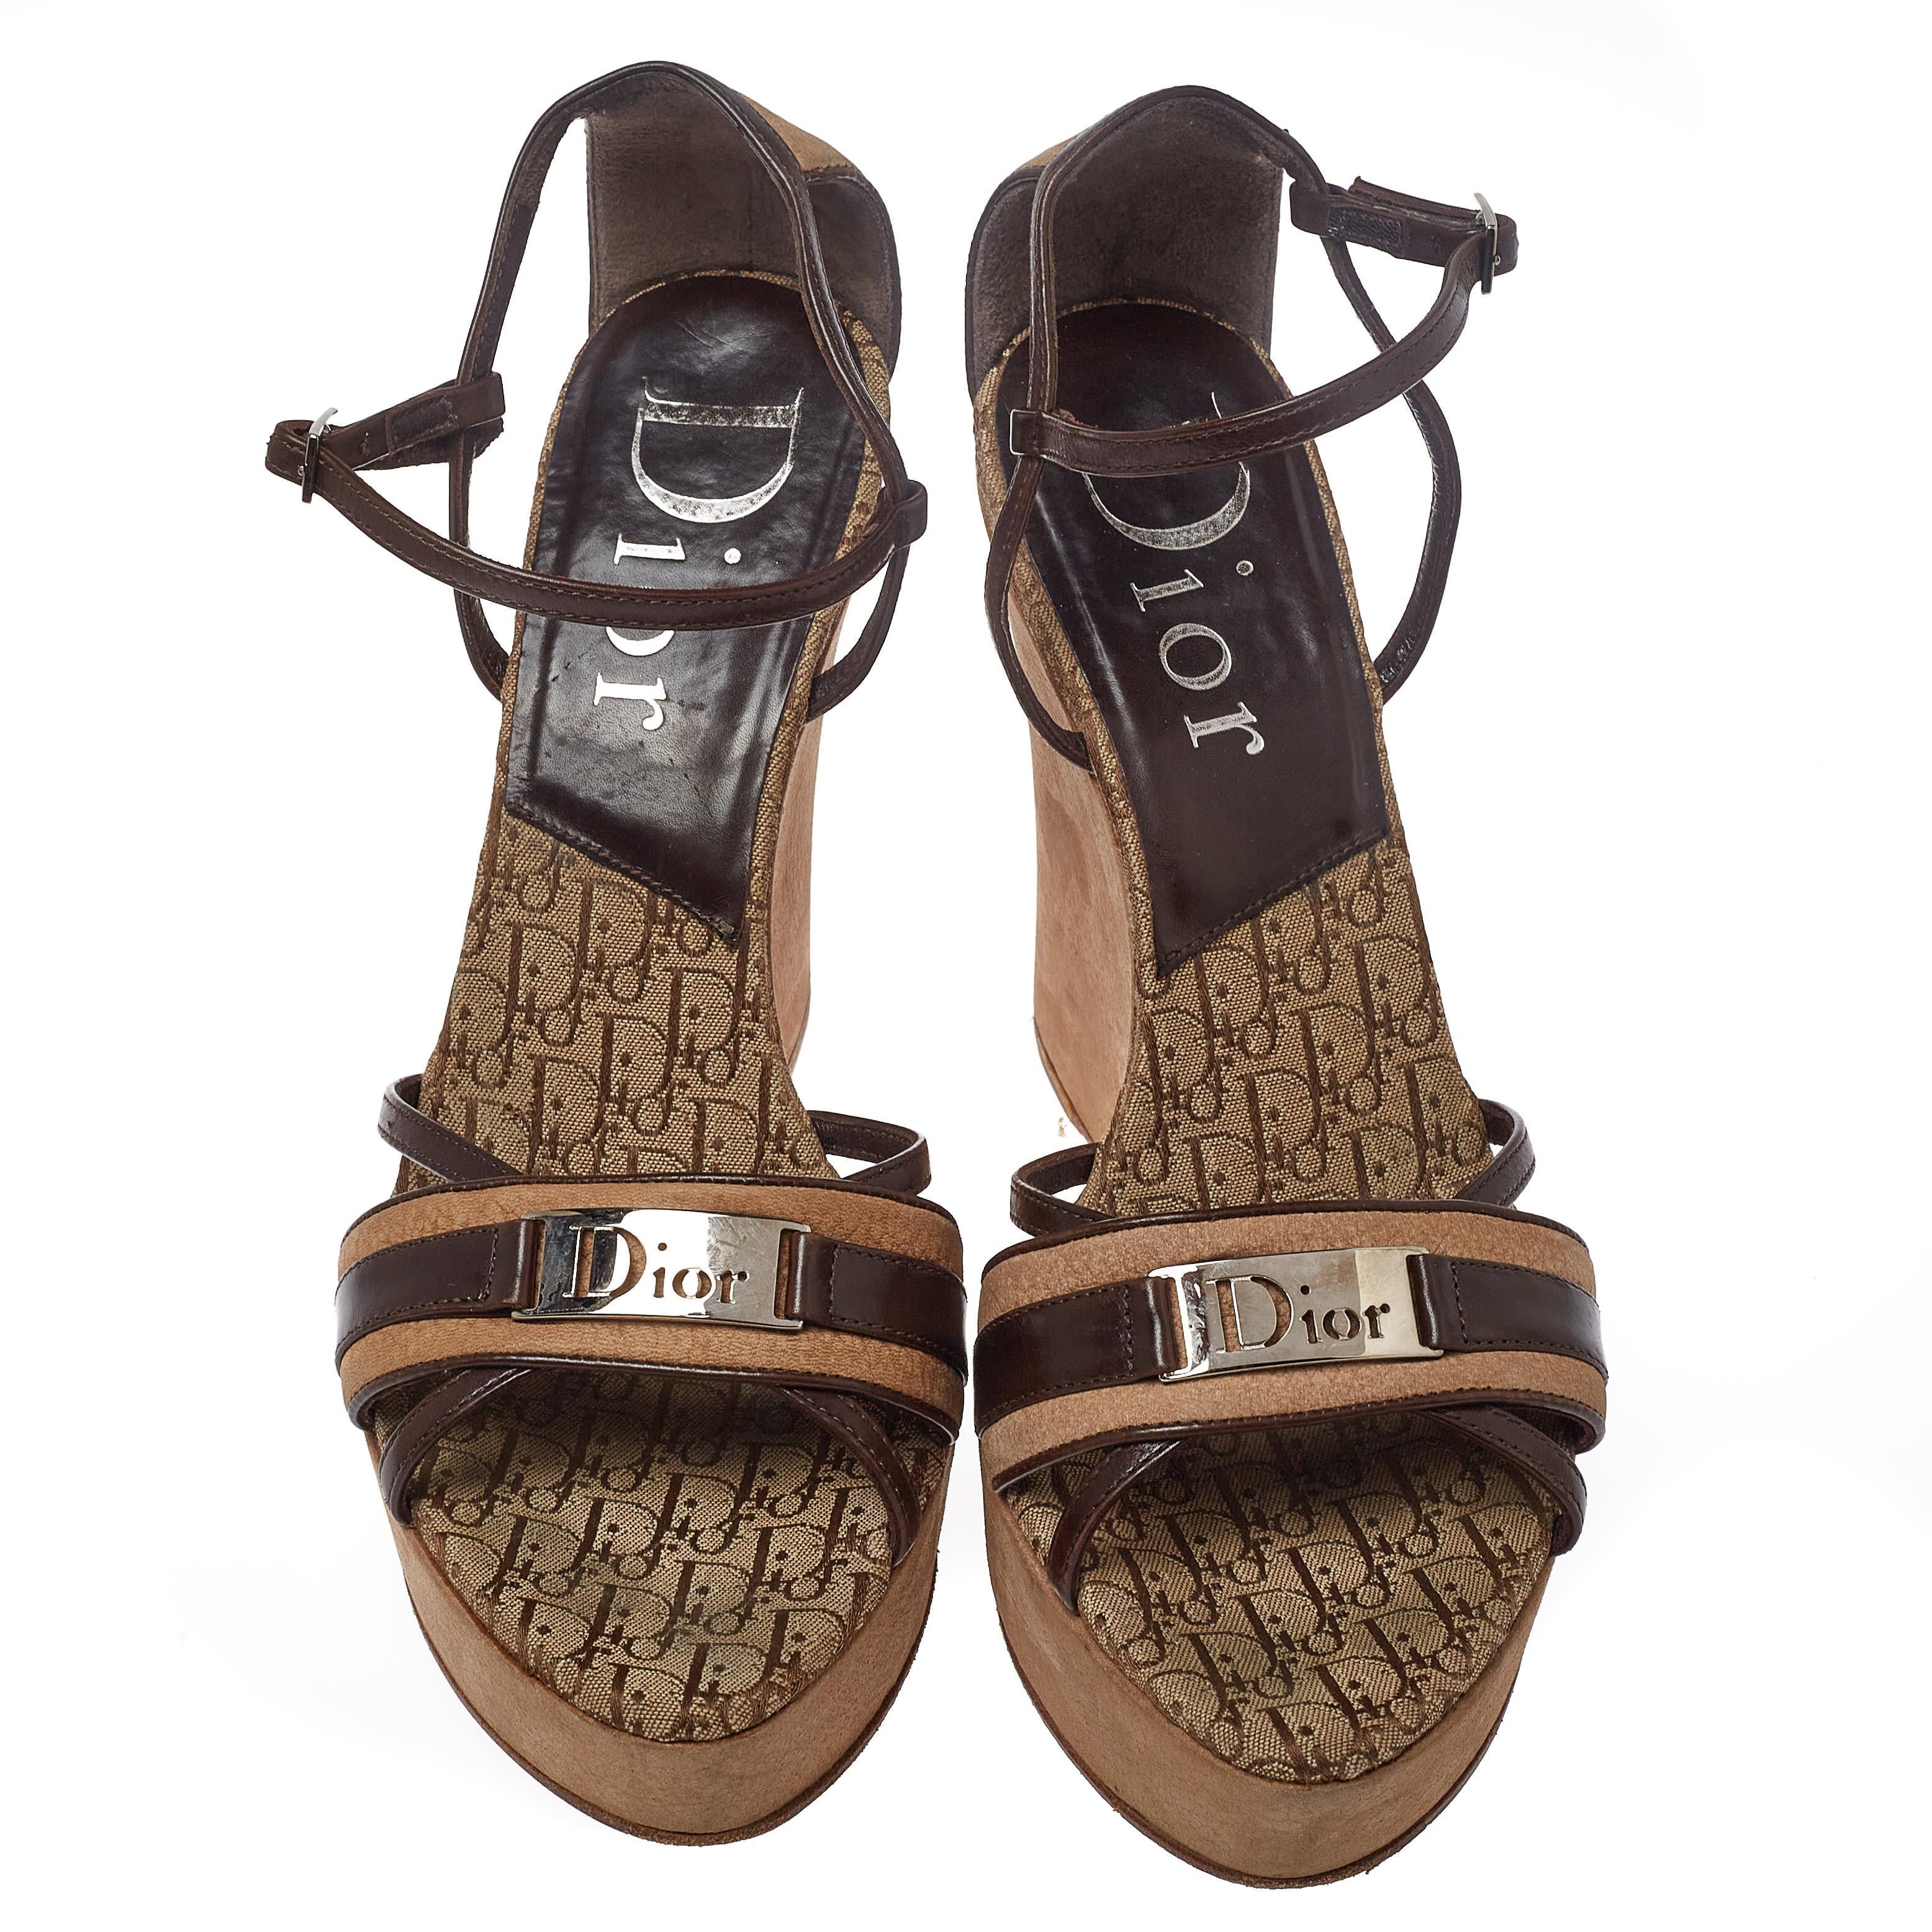 Chic, sophisticated, and very stylish, these sandals from Dior deserve an extraordinary place in your wardrobe! Versatile in brown, these sandals come crafted from leather and nubuck Diorissmo and feature an open toe silhouette. They flaunt a